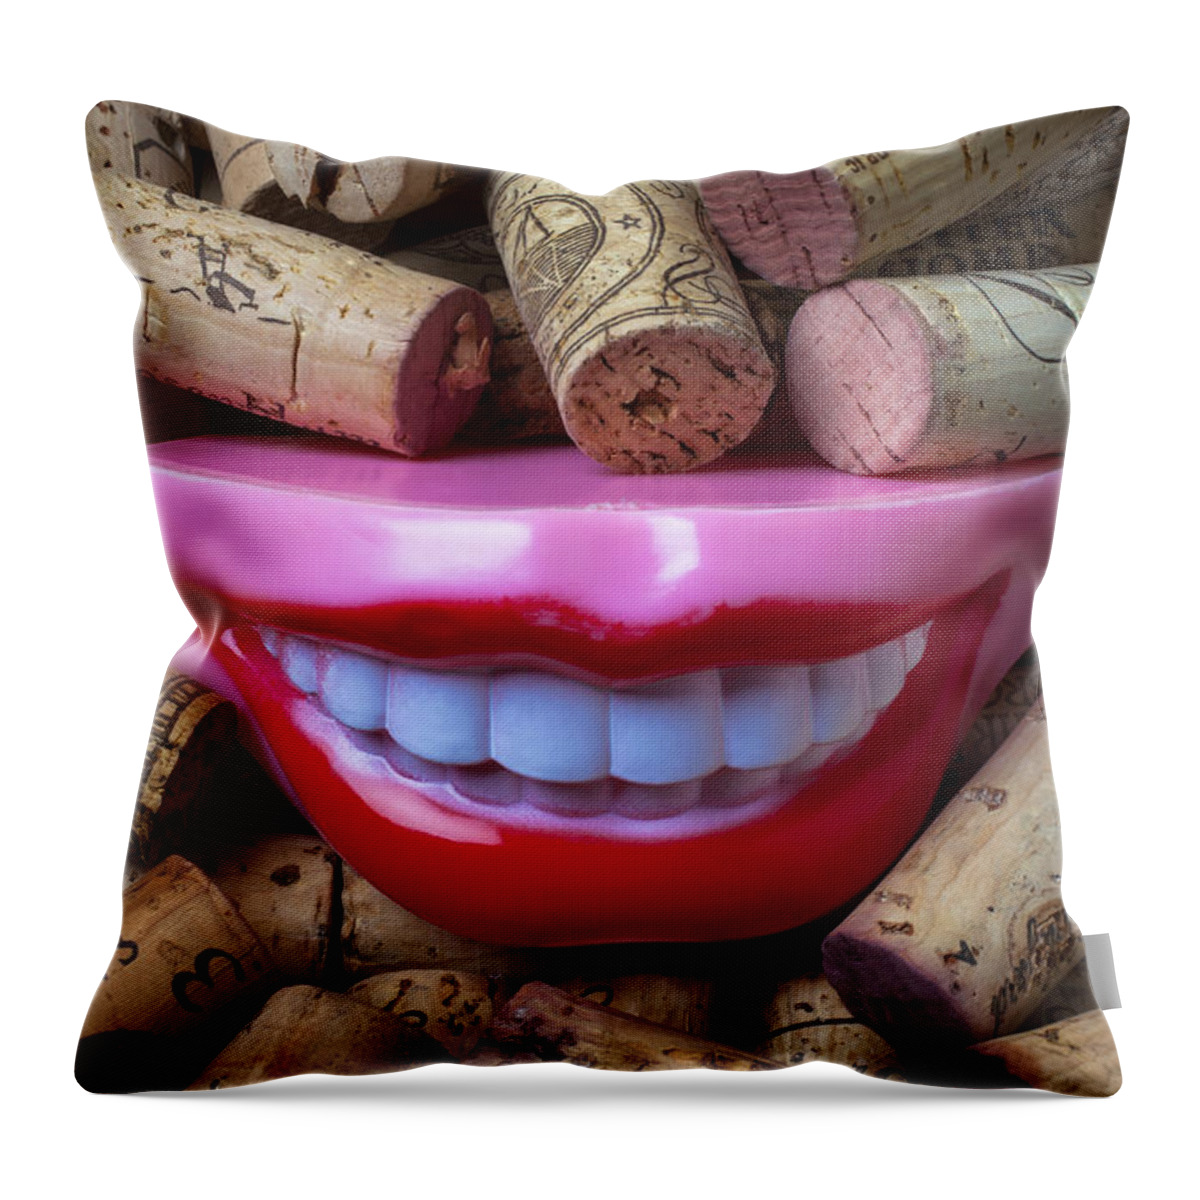 Smile Throw Pillow featuring the photograph Smile among wine corks by Garry Gay